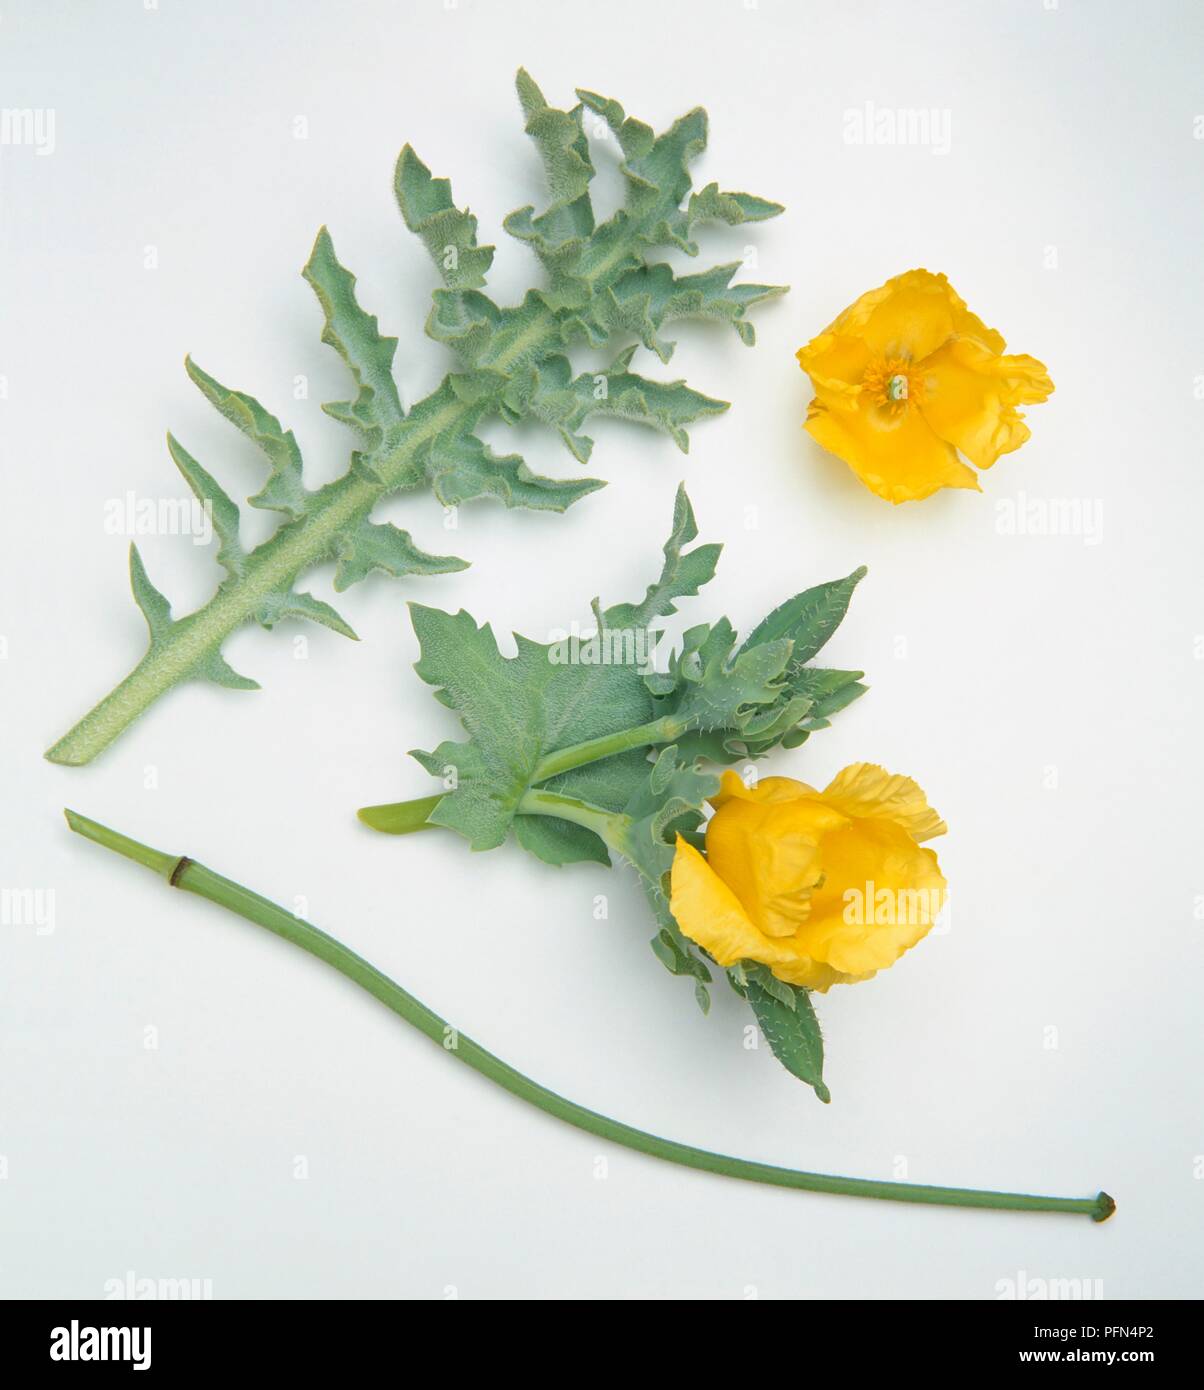 Glaucium flavum (Yellow horned poppy), stem, yellow flowers, and leaves Stock Photo